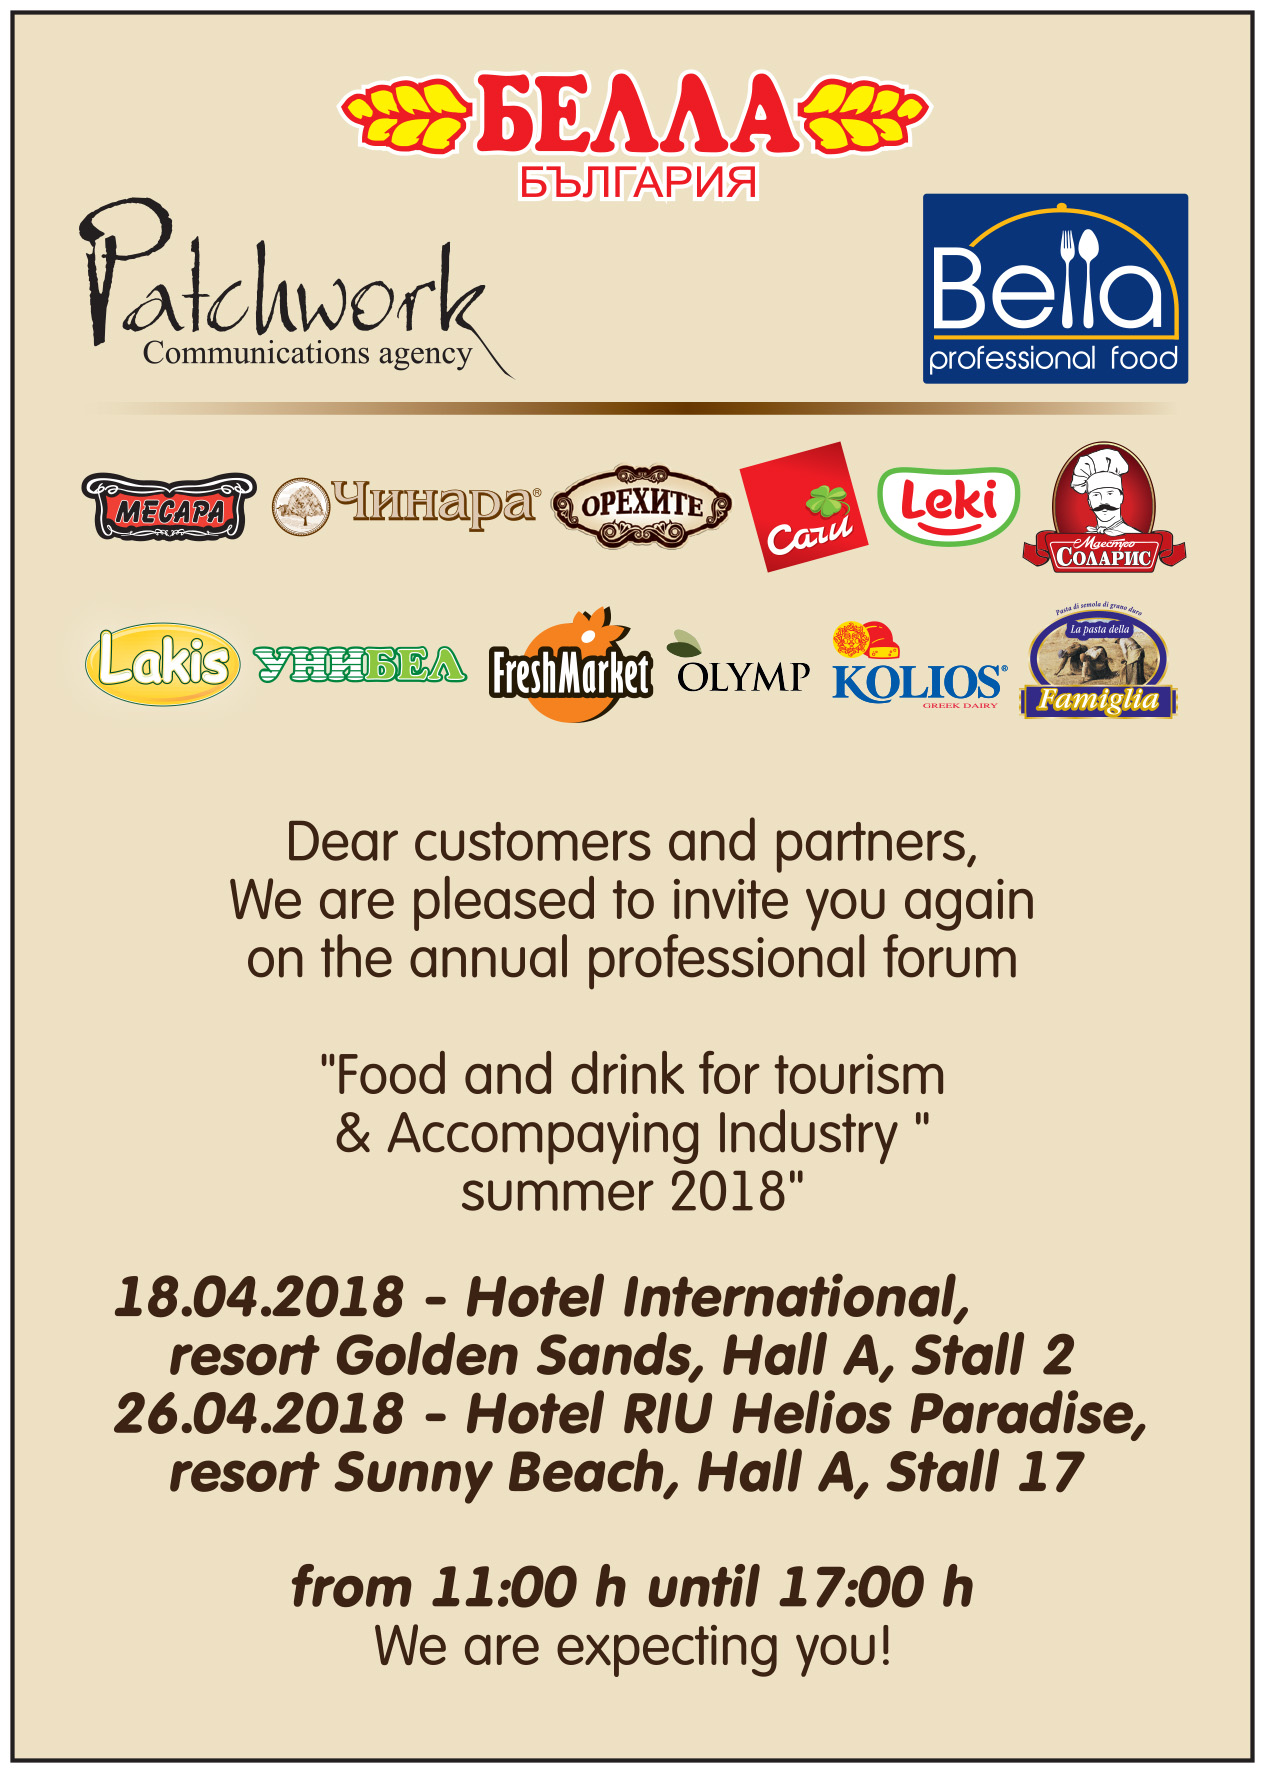 Business meetings with Bella Professional Food in Golden Sands & Sunny Beach in April